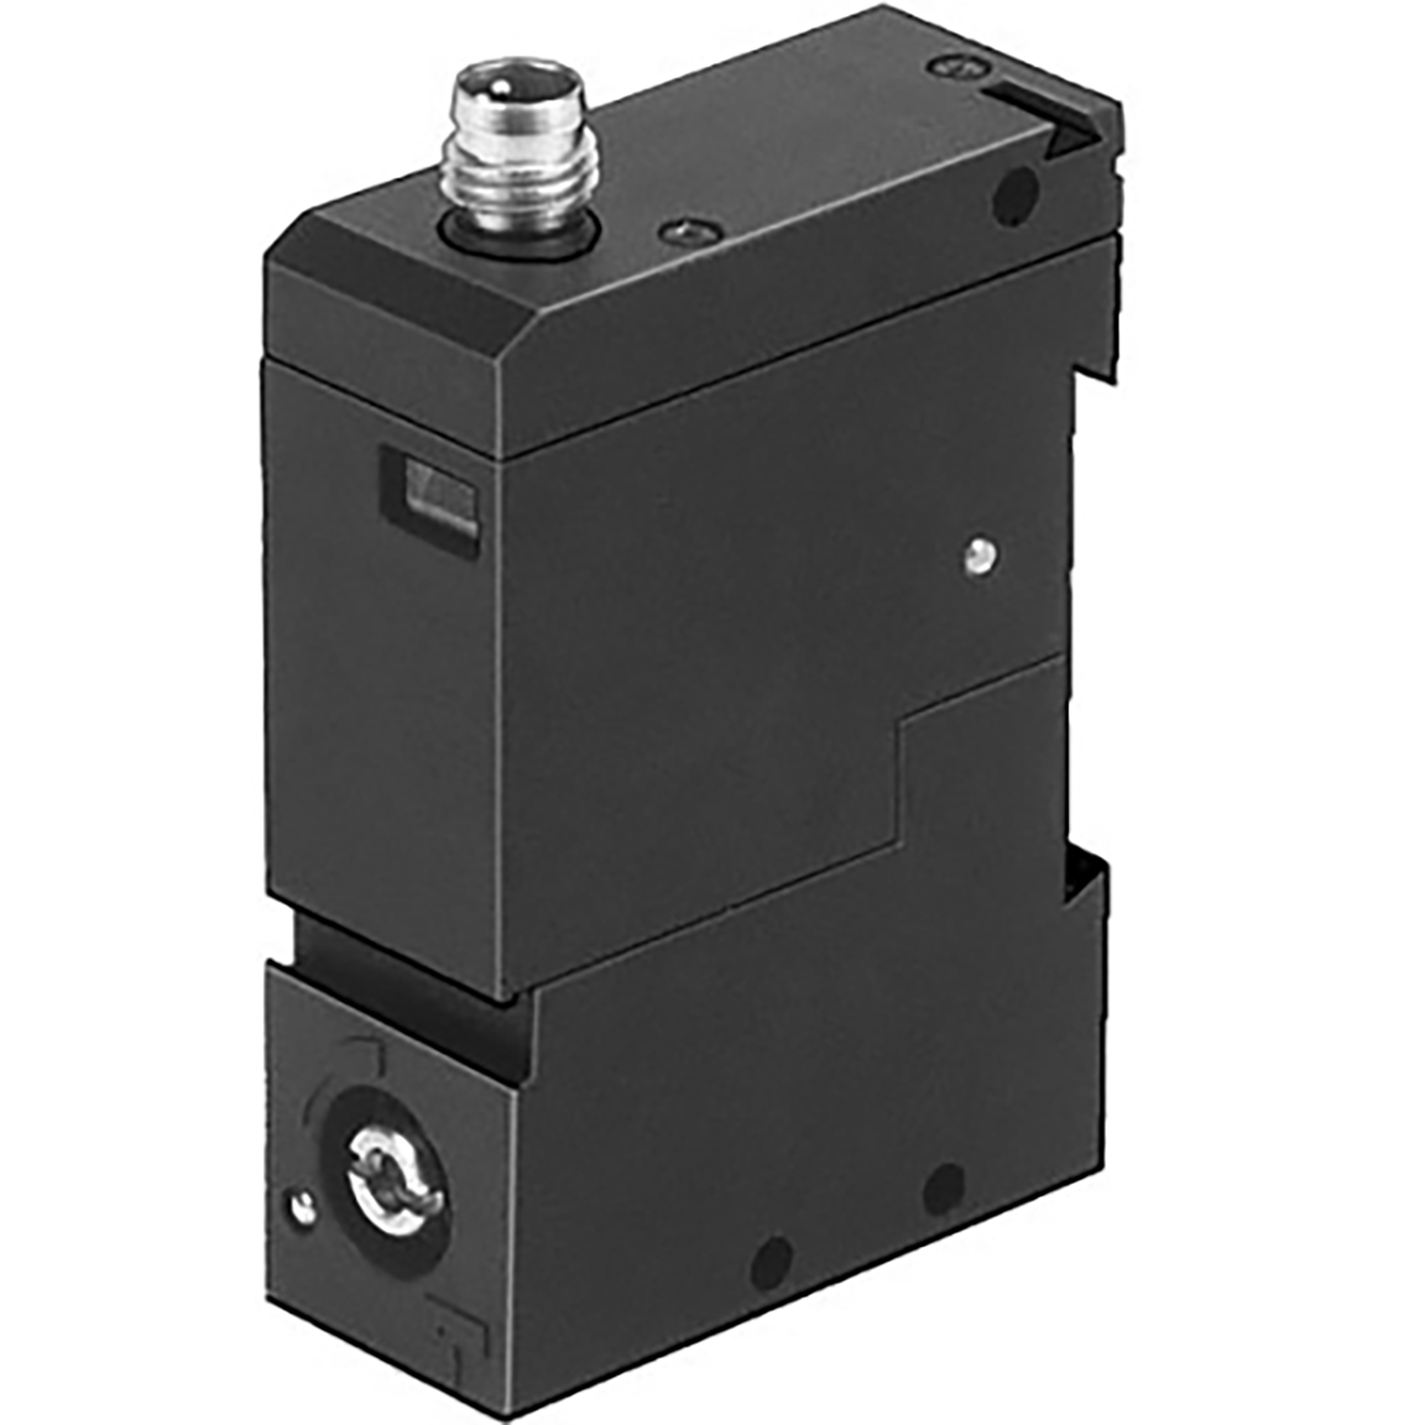 PEV-W-S-LED-GH PRESSURE SWITCH | Fluid-Air Components